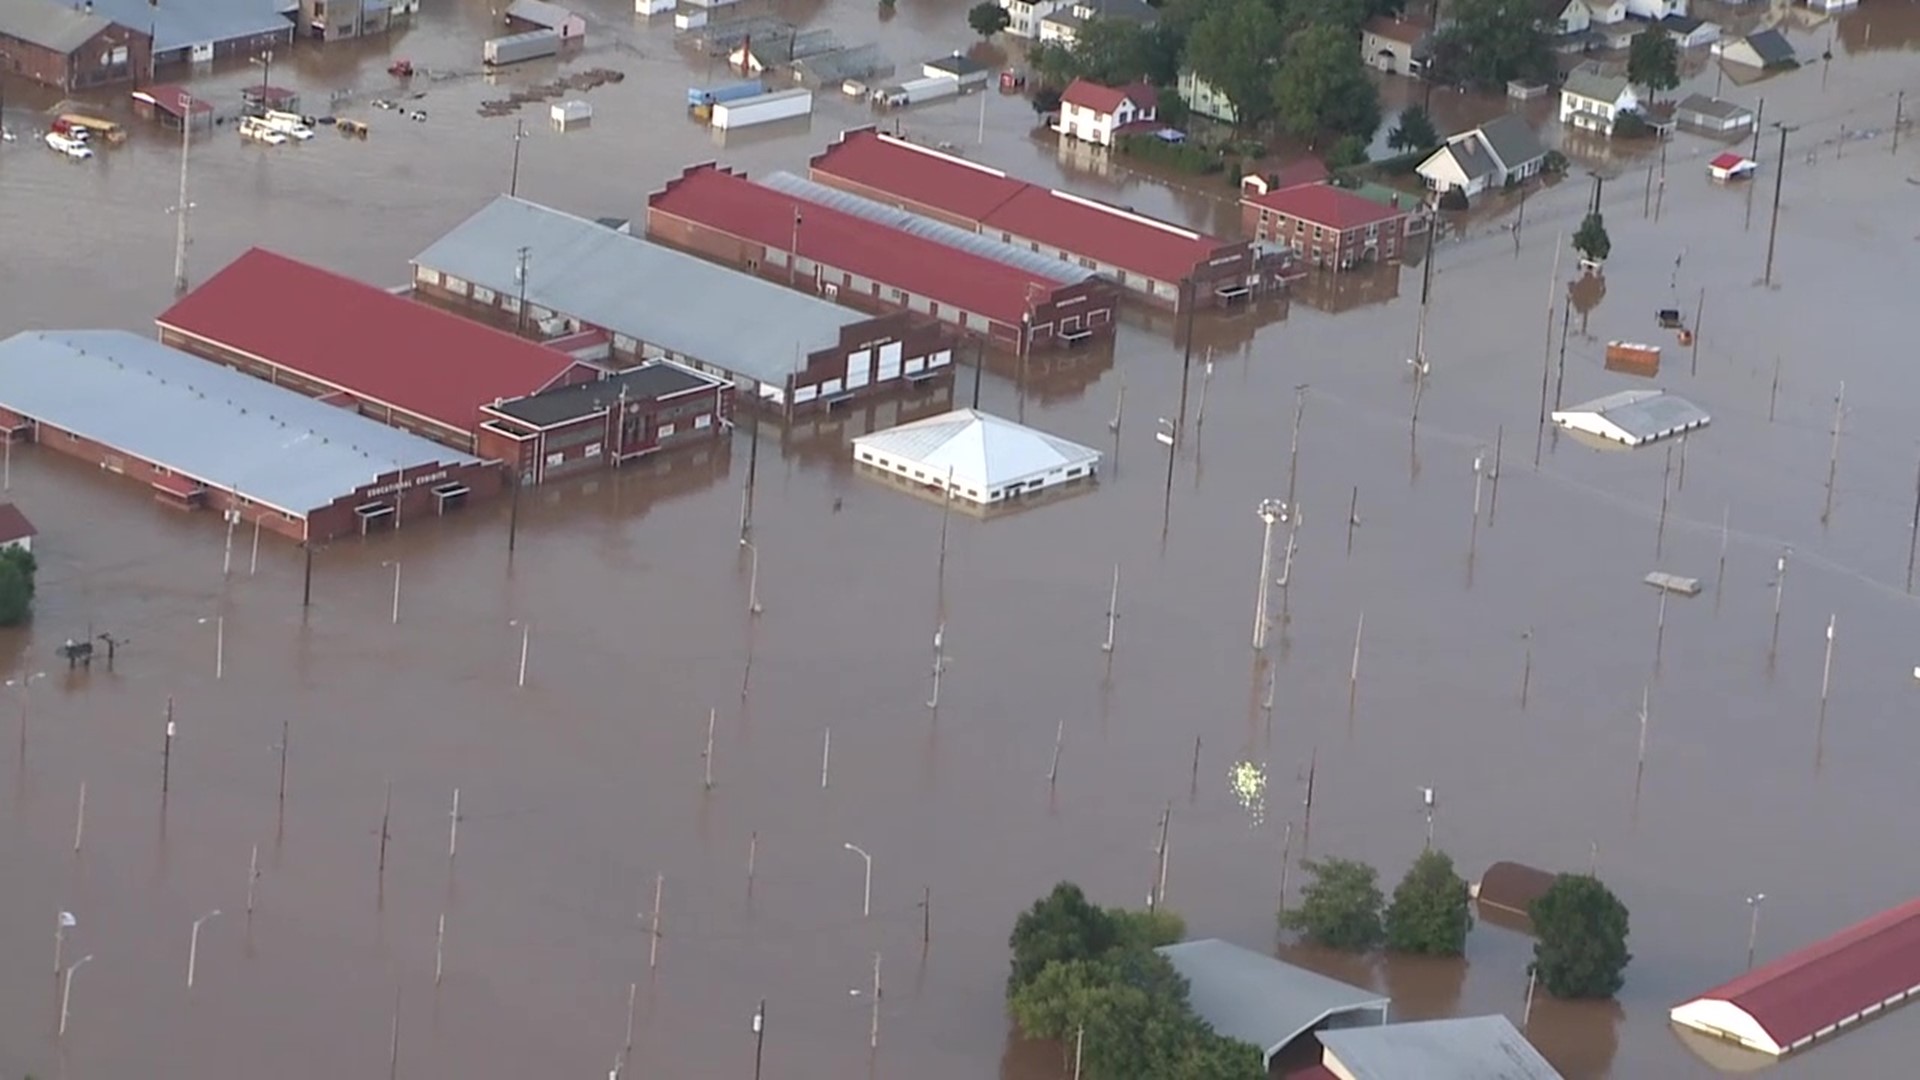 It's been nine years since the Flood of 2011 destroyed homes and businesses throughout our area.